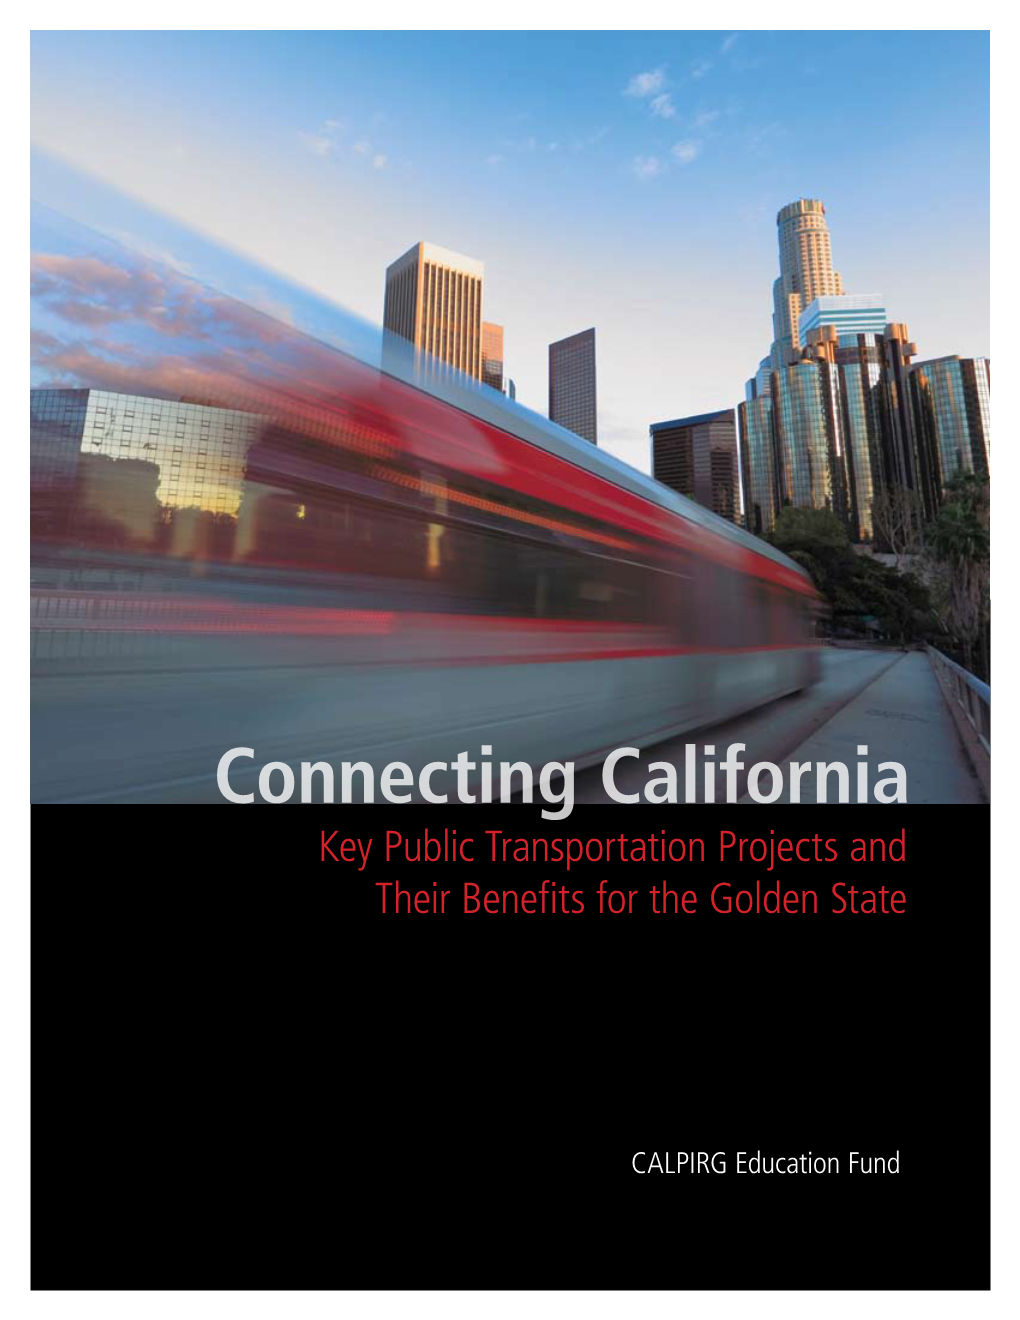 Connecting California Key Public Transportation Projects and Their Benefits for the Golden State